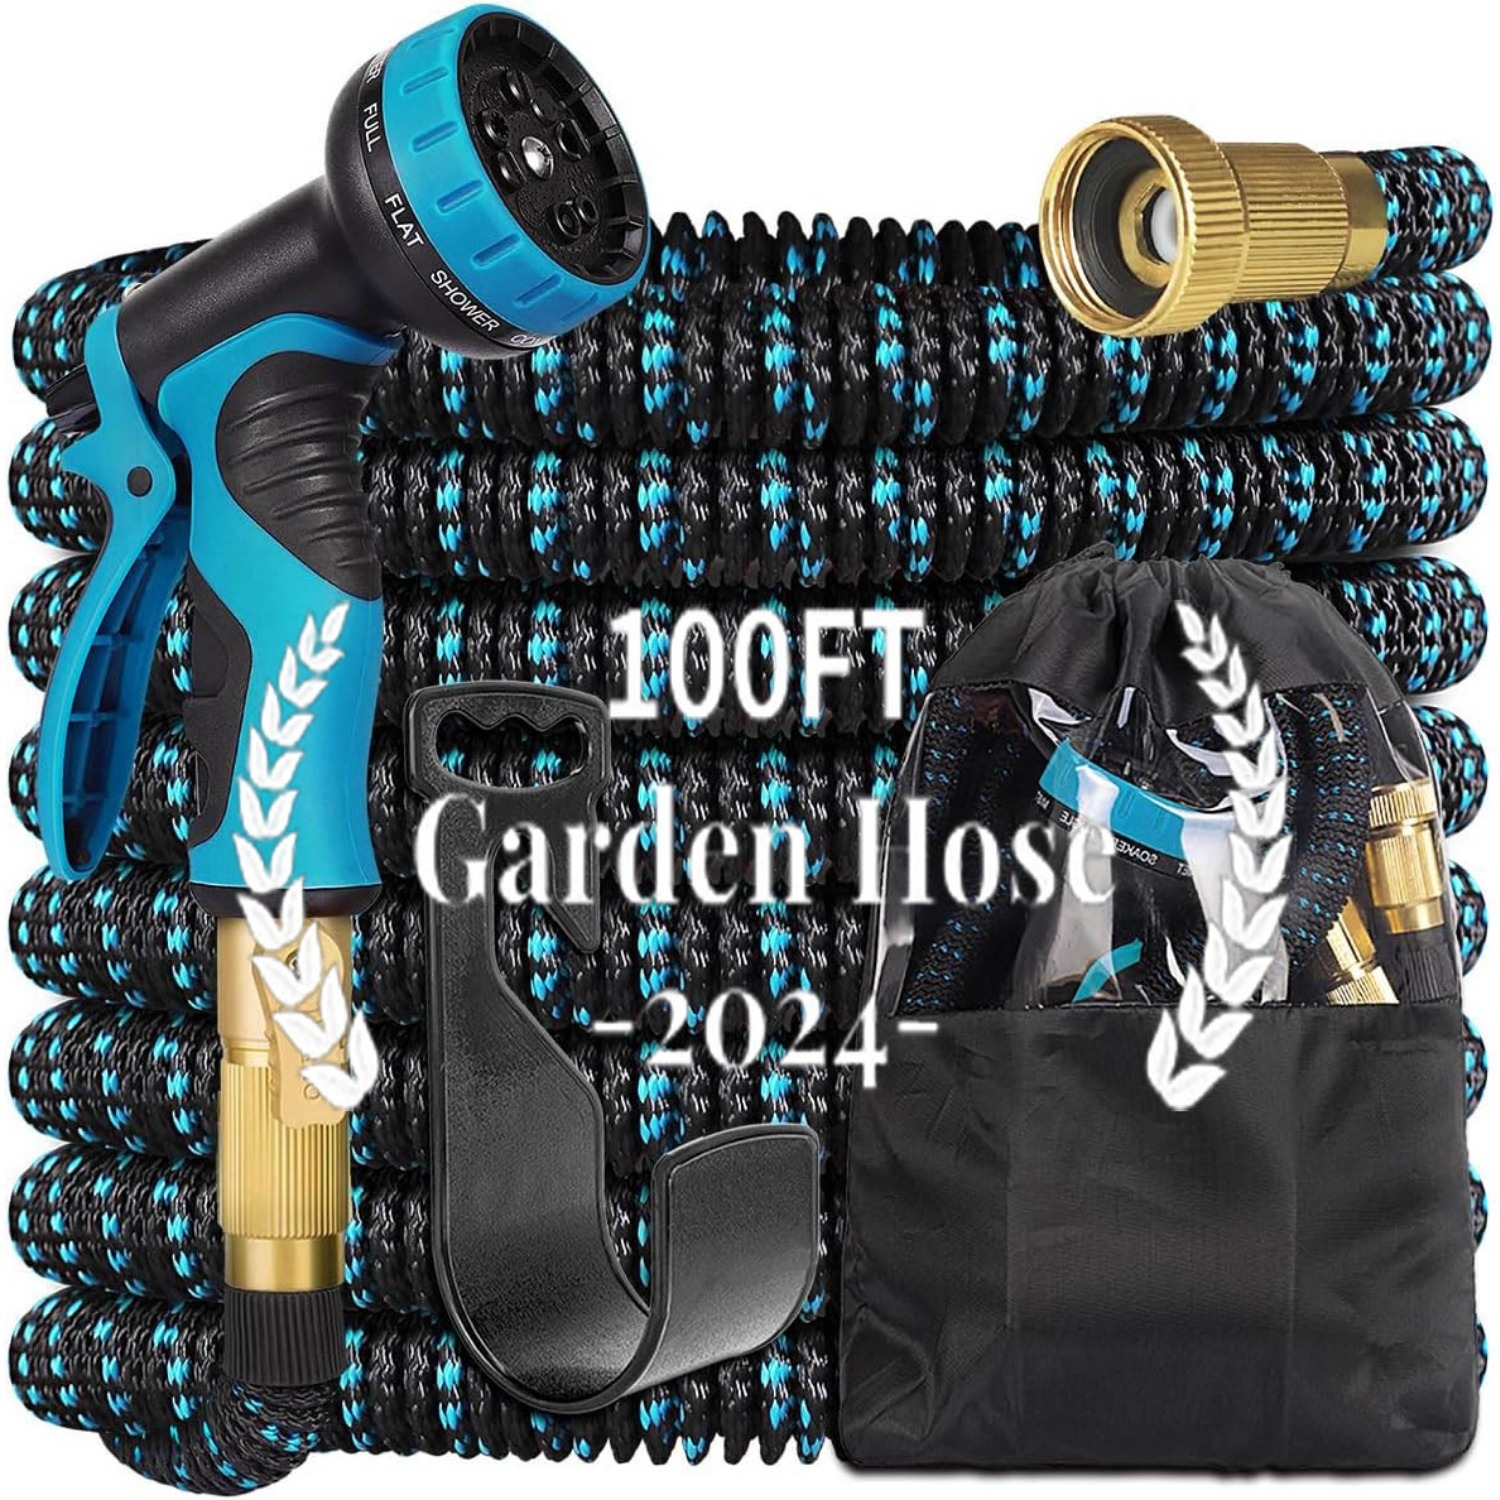 

Expandable Garden Hose 100ft, Expandable Hose With 10 Function Spray Nozzle, Flexible Hose 100 Feet, Crafted With 34" Solid Brass Fittings, 3750d Extra-strength Fabric